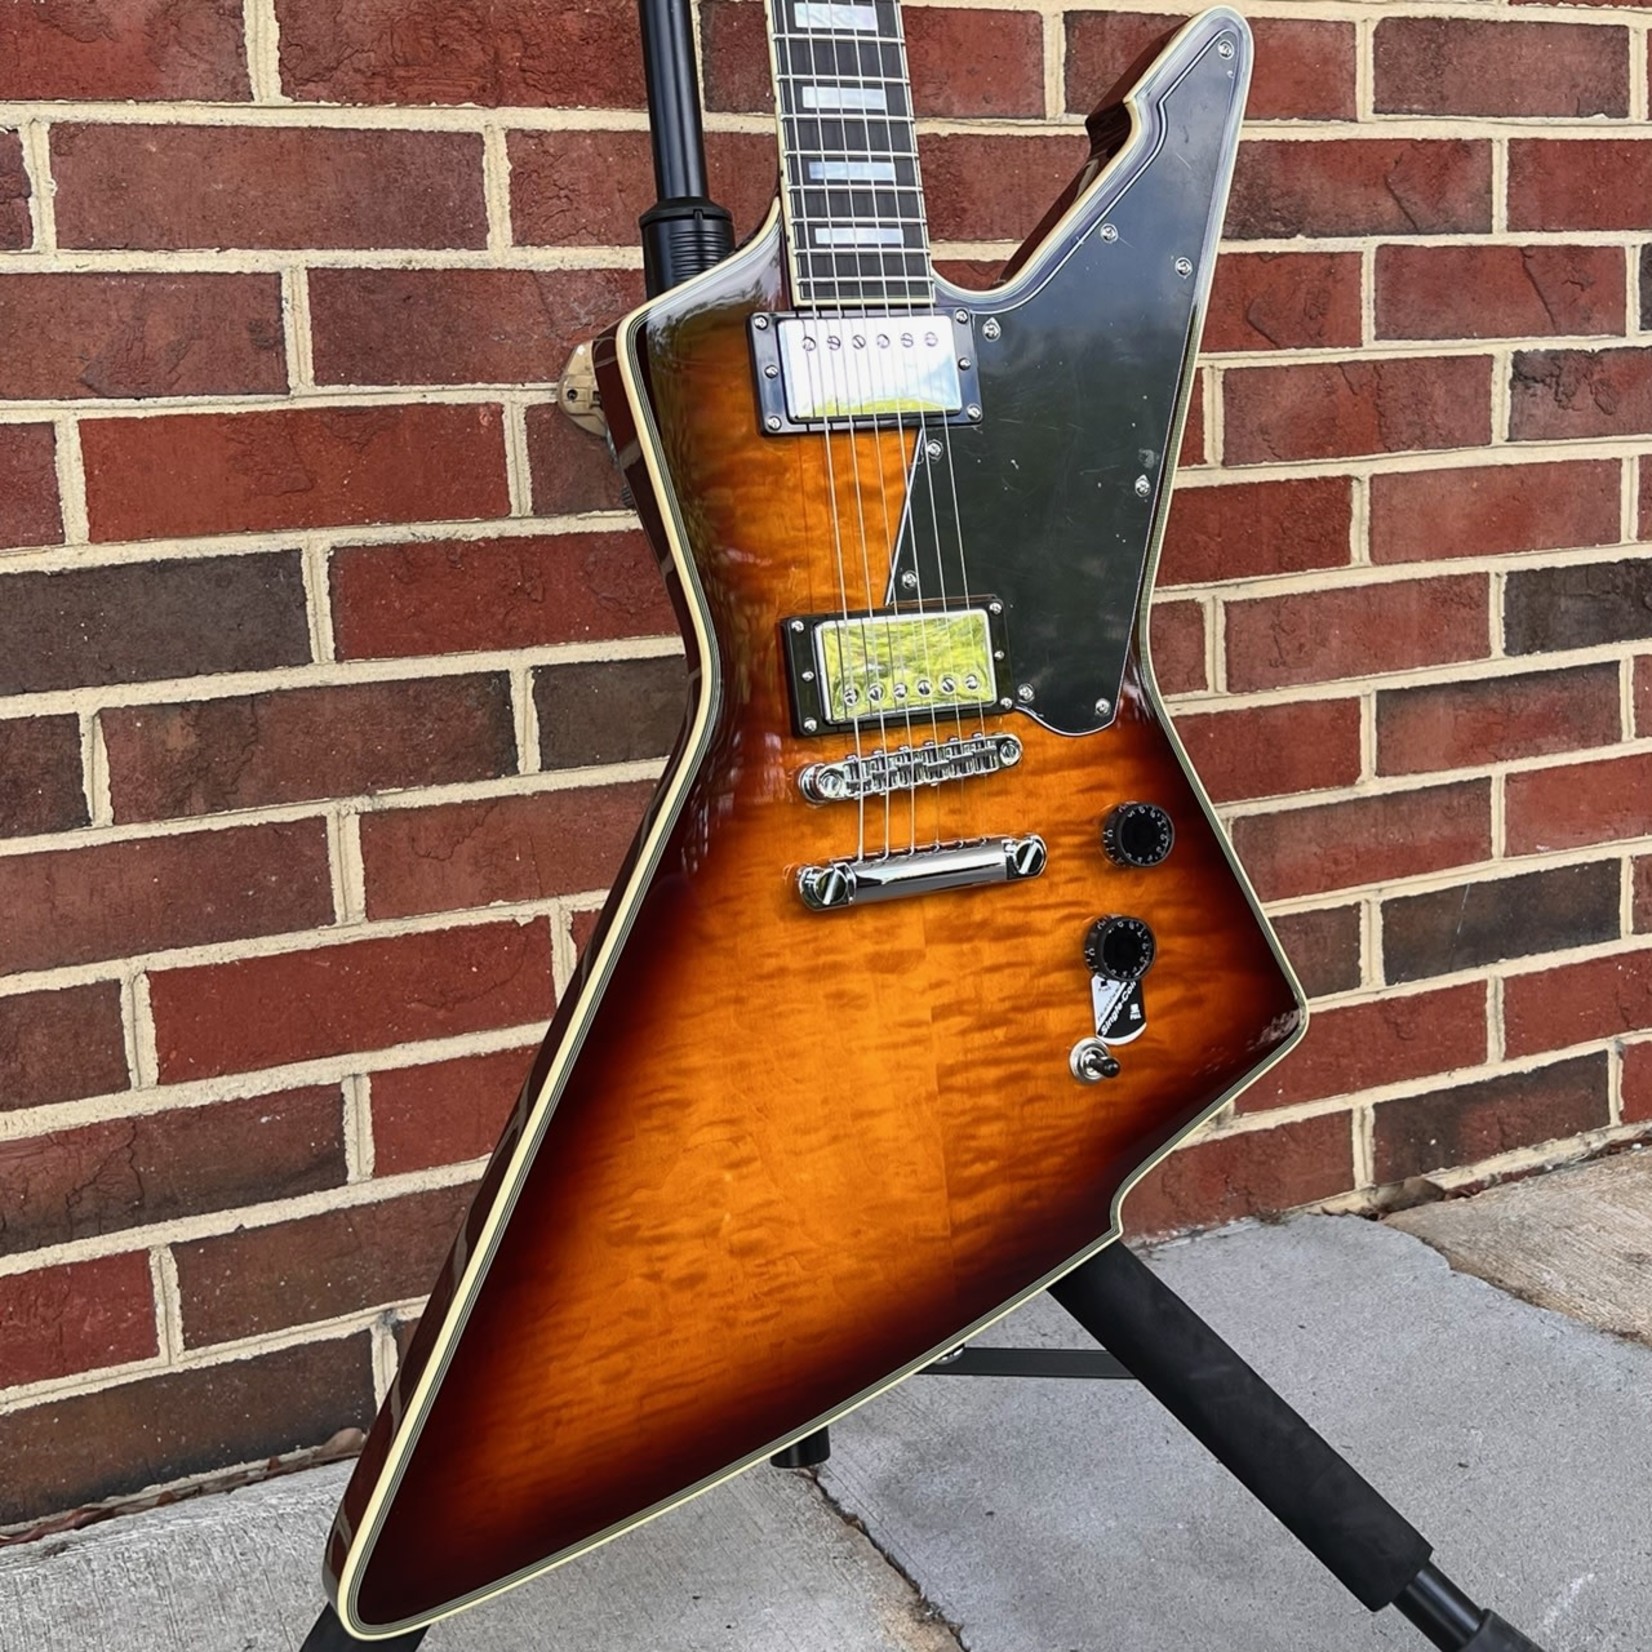 Schecter Guitar Research Schecter E-1 Custom, Vintage Sunburst, Quilted Maple Top, Ebony Fretboard, Locking Tuners, Schecter USA Sunset Strip/Pasadena Pickups, SN# W21084360